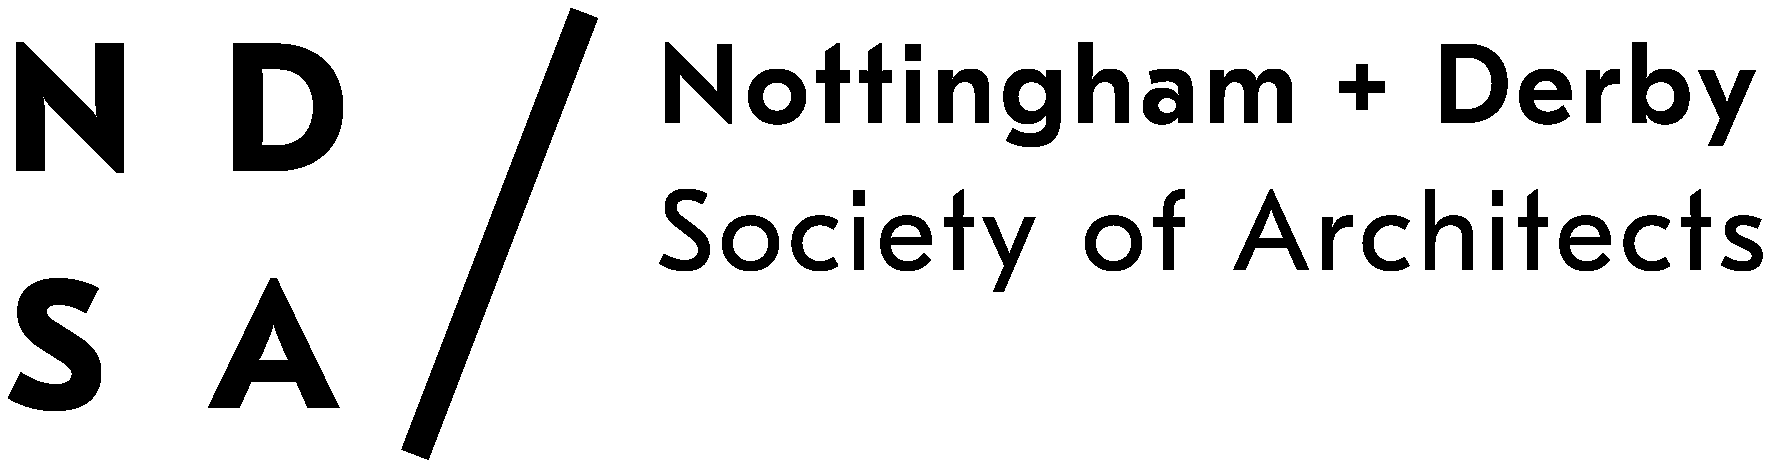 Nottingham and Derby Society of Architects